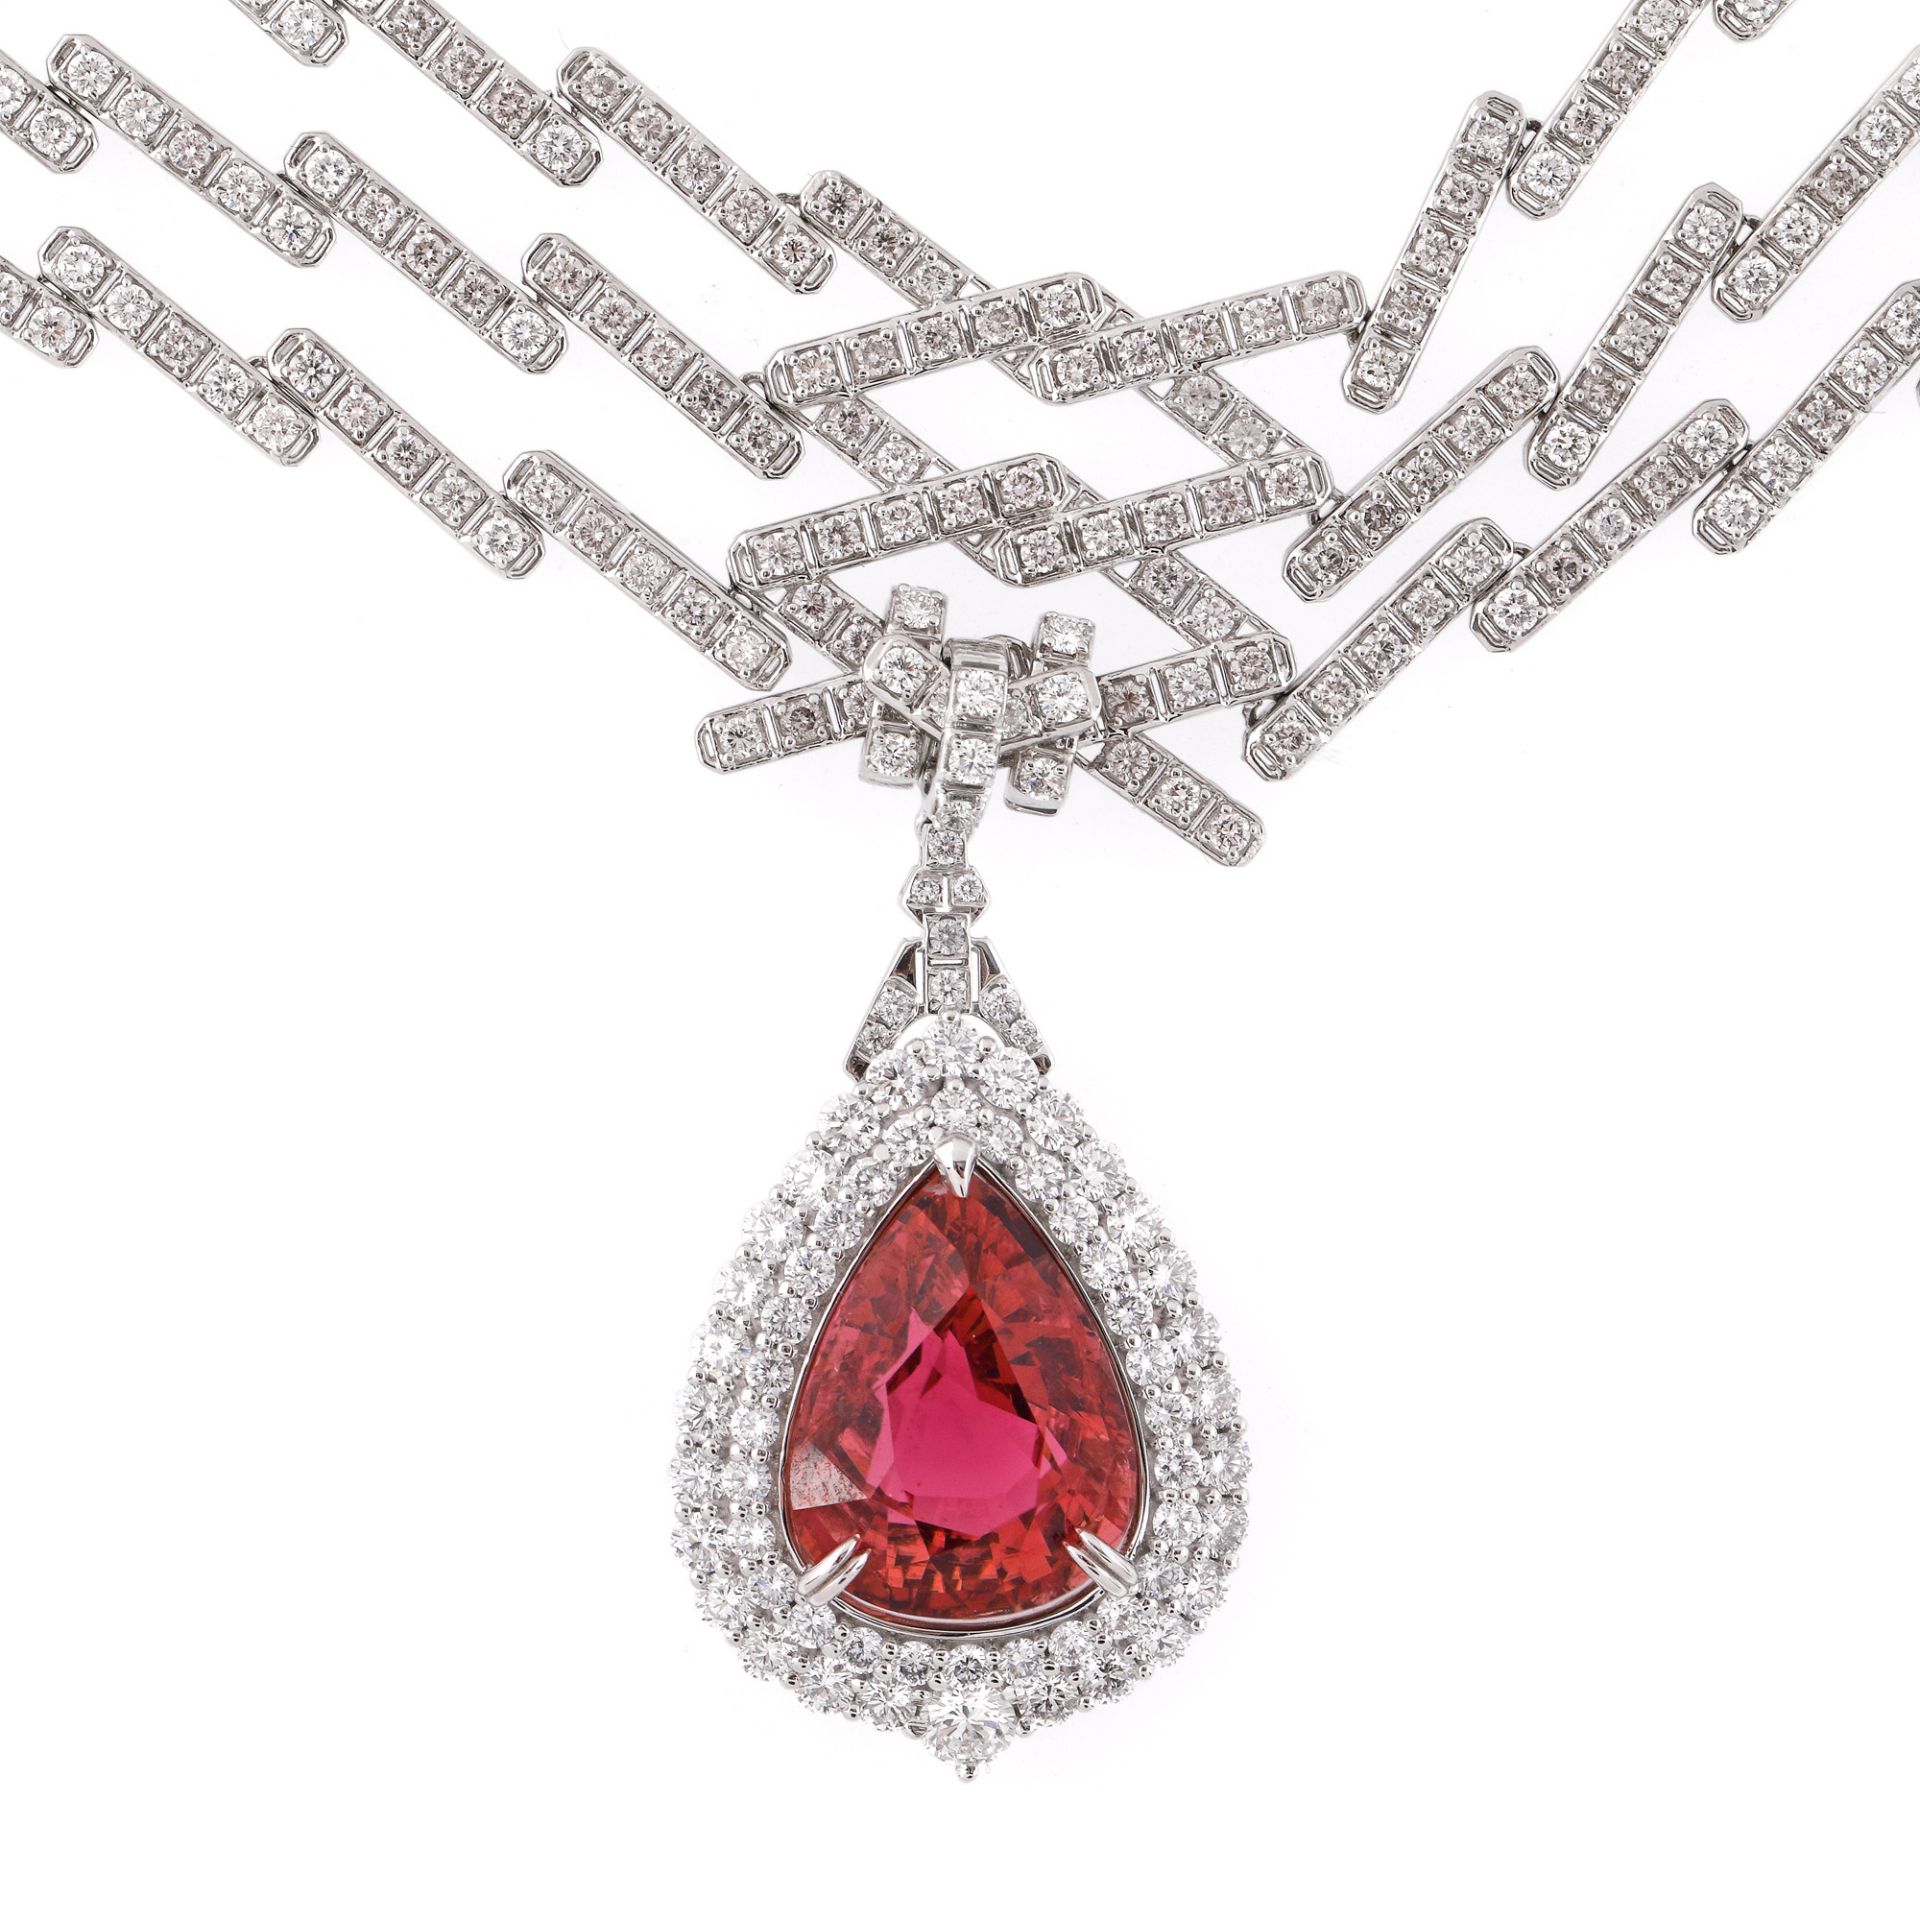 Convertible white gold pendant necklace, five ways to wear, decorated with diamonds and pink tourmal - Image 2 of 4